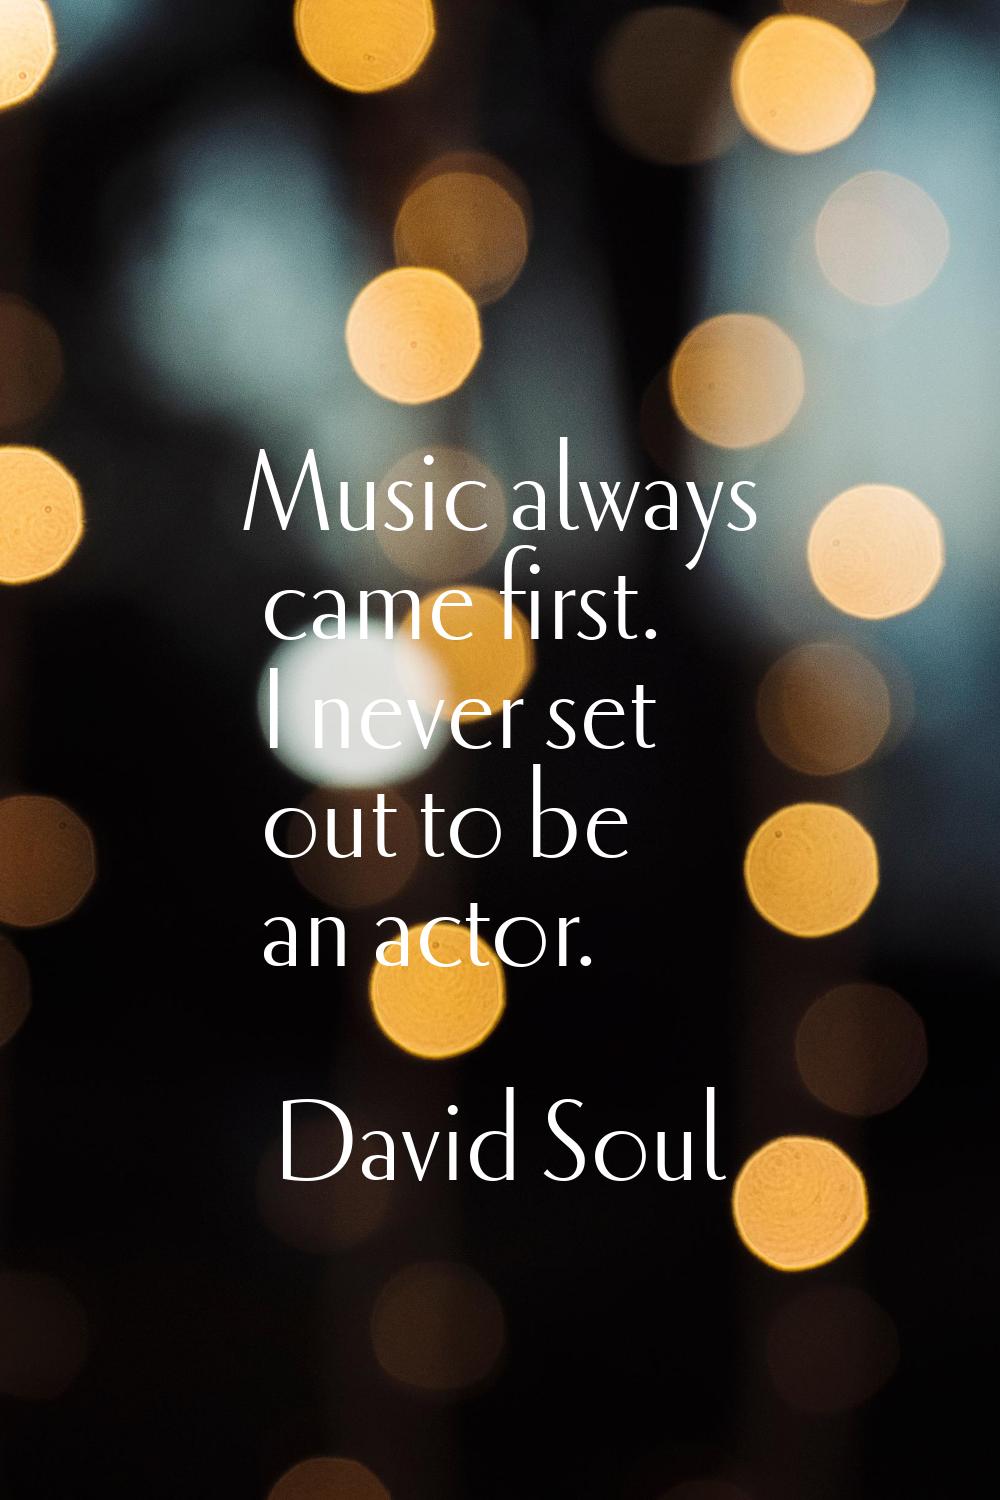 Music always came first. I never set out to be an actor.